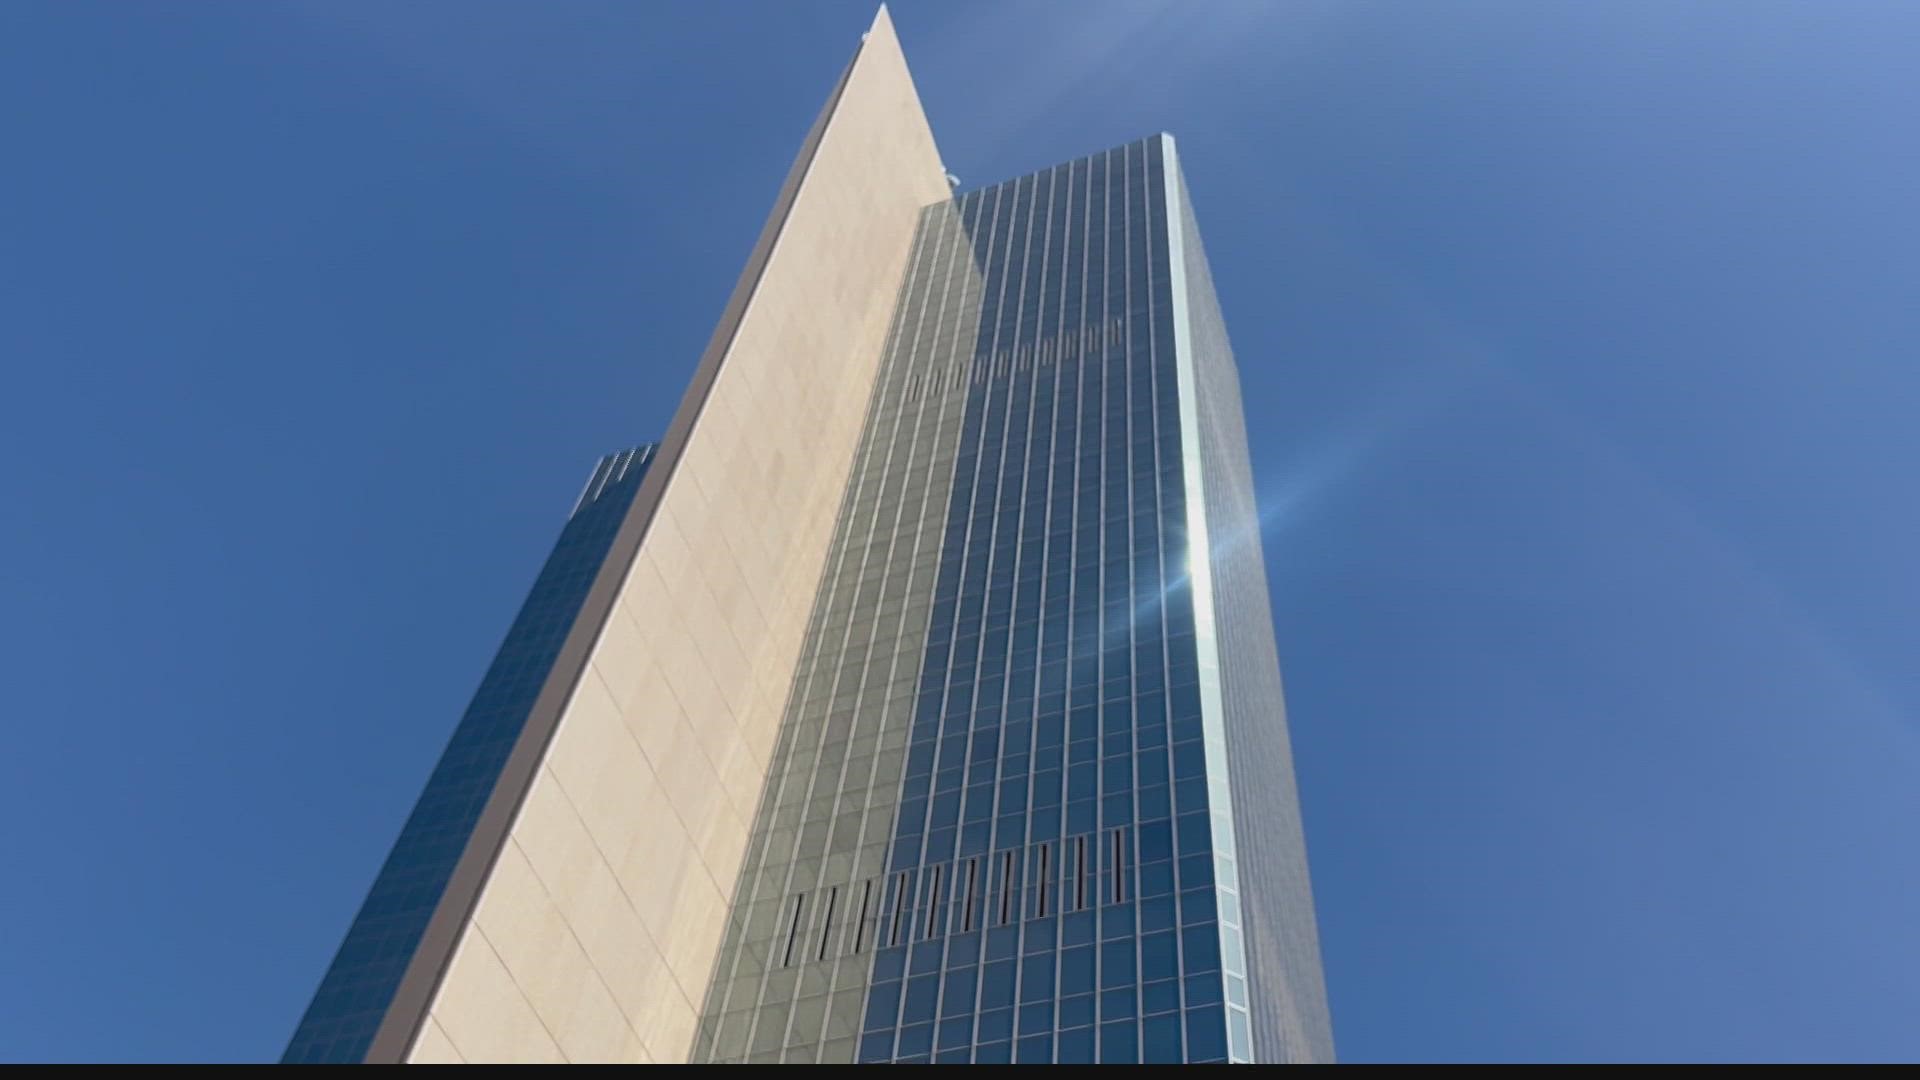 The 40-story building in downtown Phoenix has a long history as headquarters for several banks since the 1970s. Now the building remains vacant.